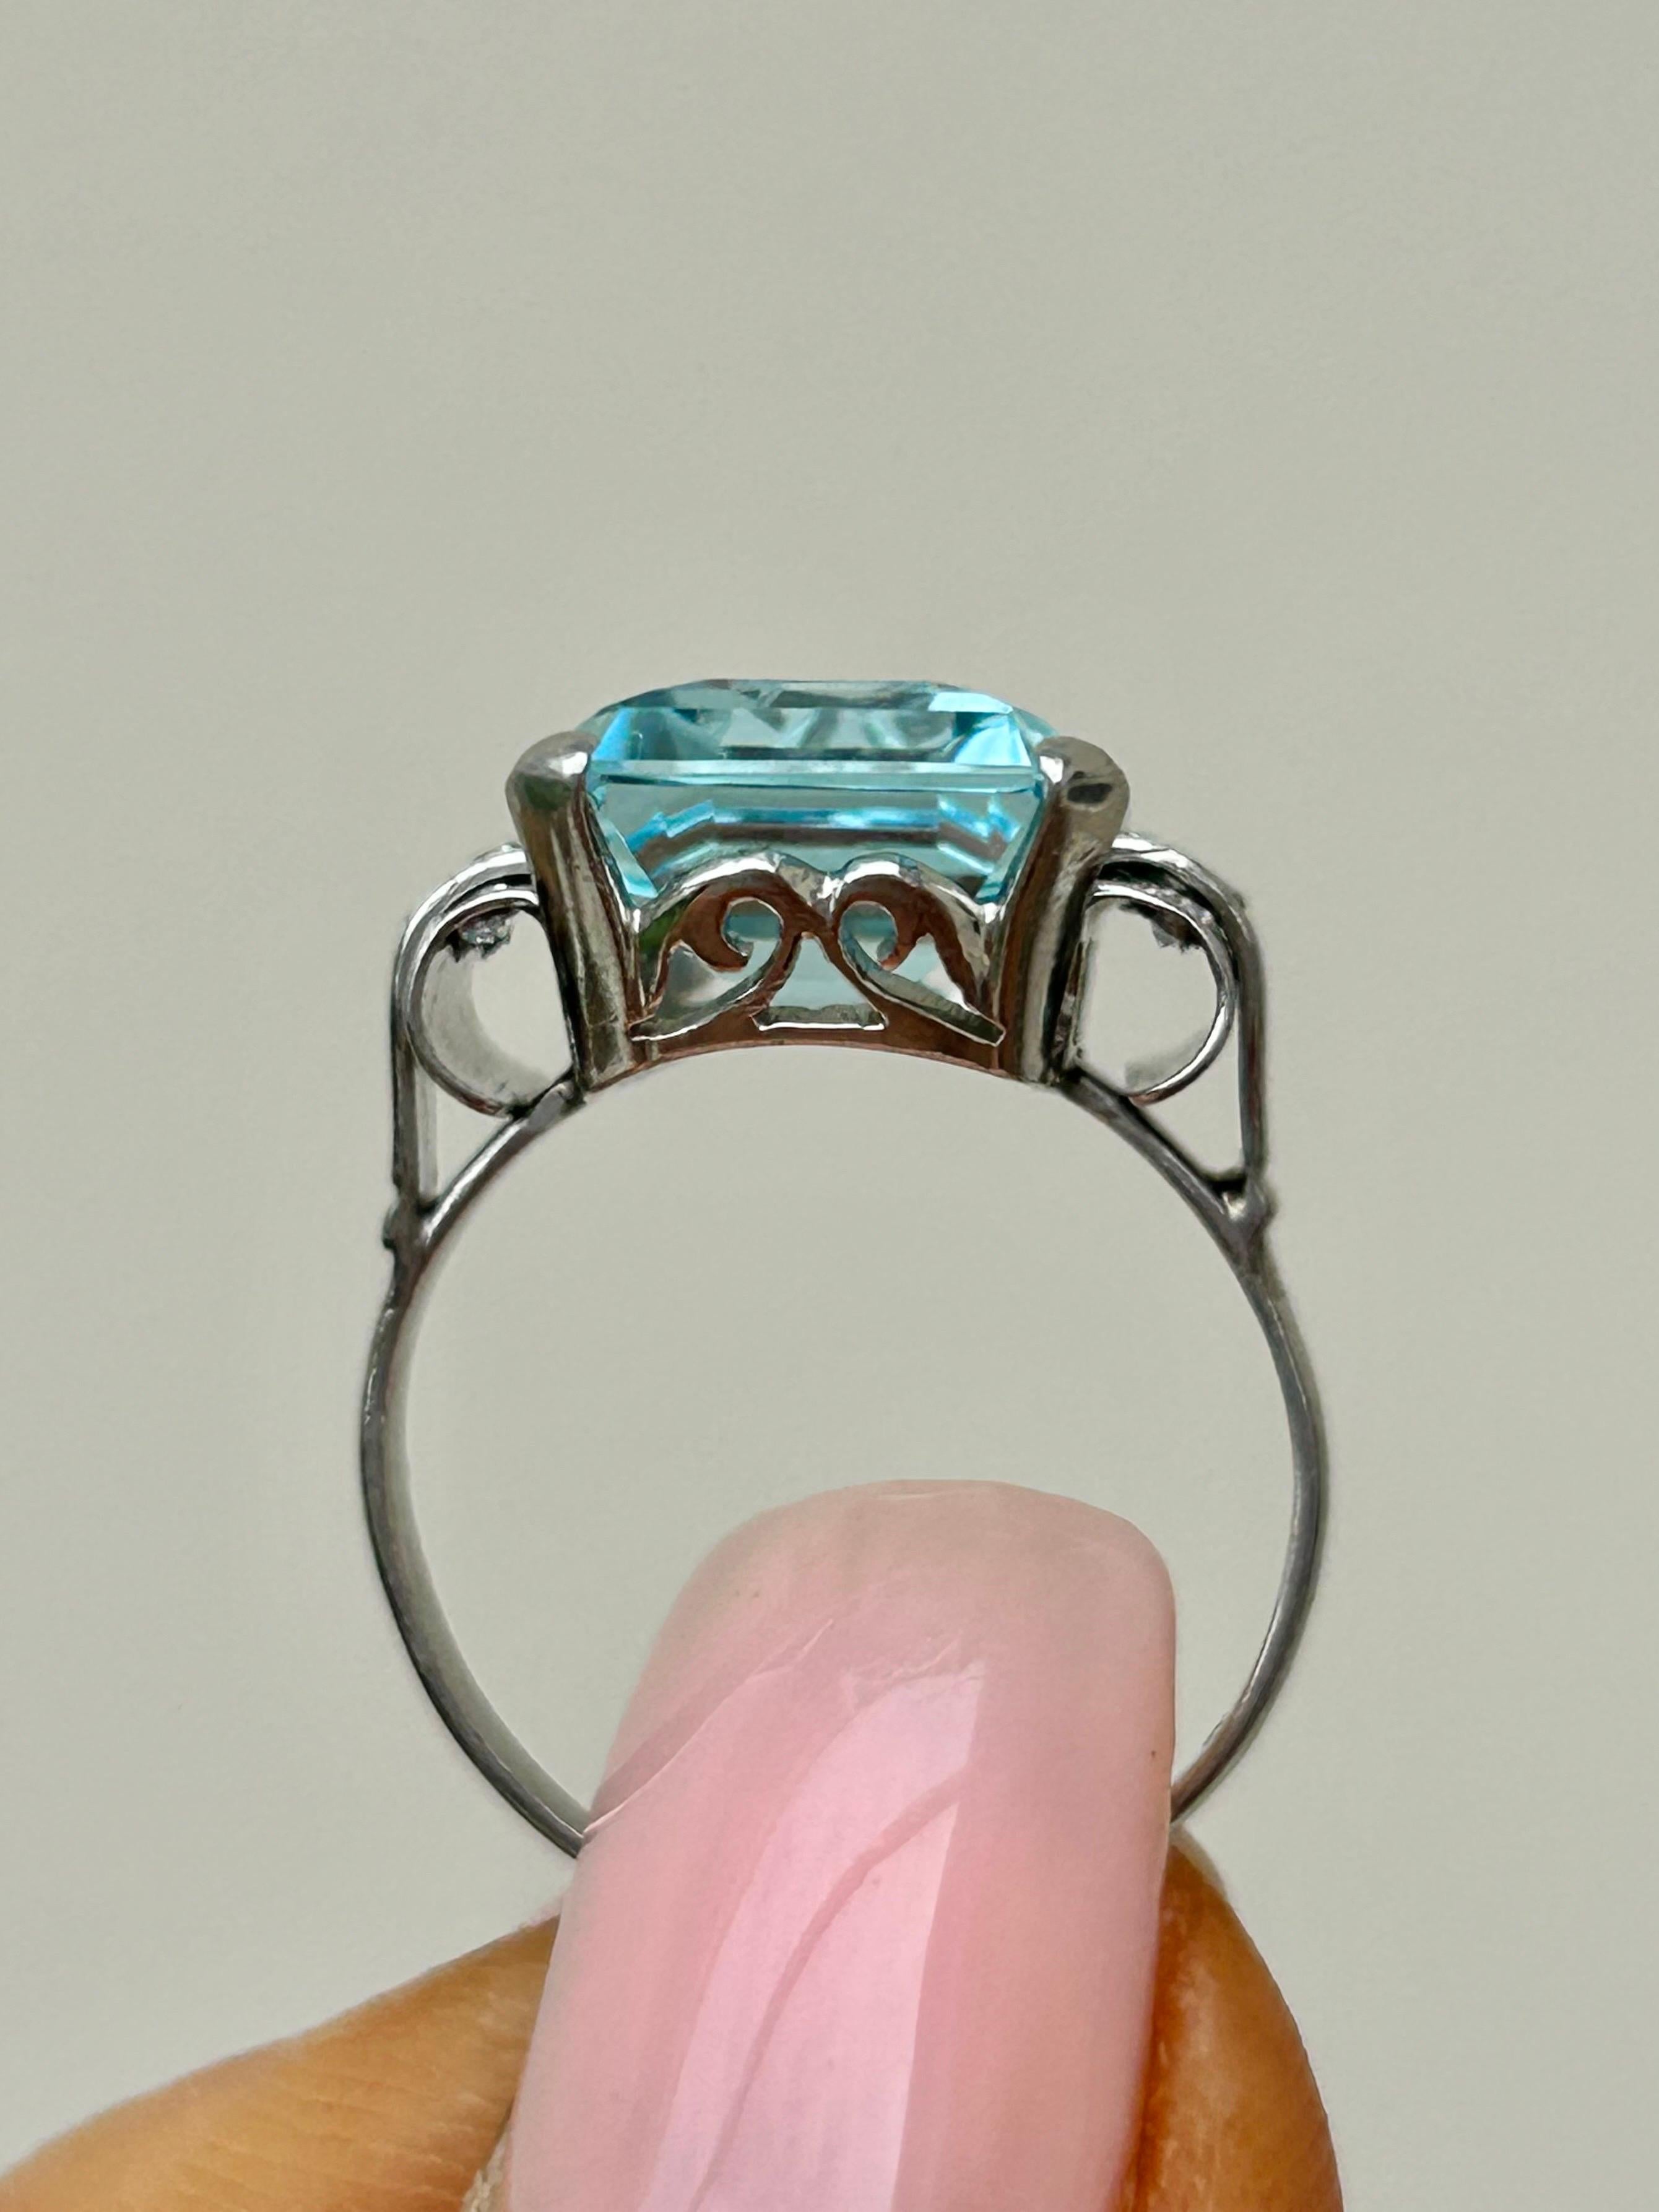 Outstanding Art Deco C.1930 Platinum Aquamarine and Diamond Ring 

Aquamarine approx 6 carats 
The most exquisite aquamarine stone with sweet diamond shoulders

The item comes without the box in the photo but will be presented in a Howard’s Antique